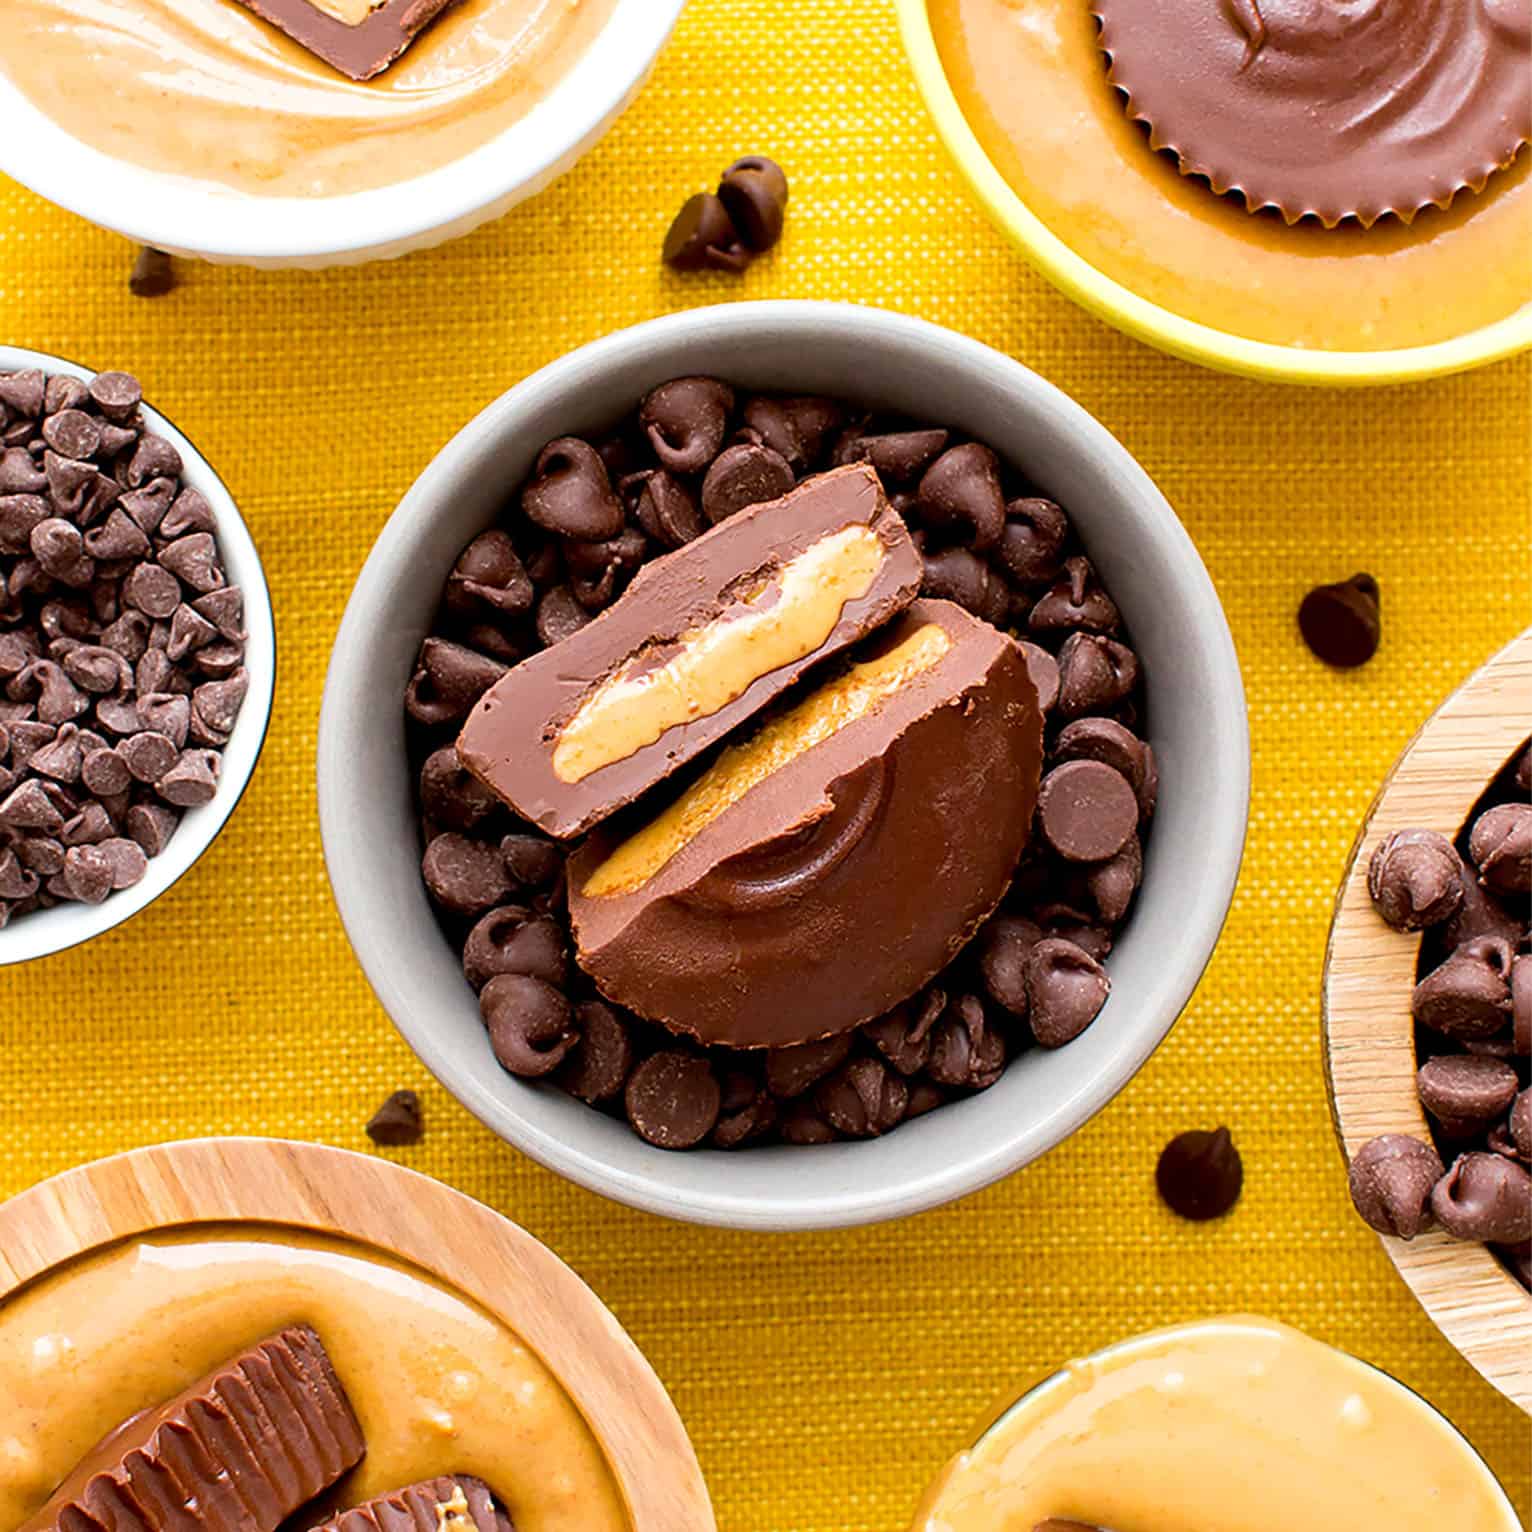 A vegan peanut butter cup split in half sitting in a bowl of chocolate chips